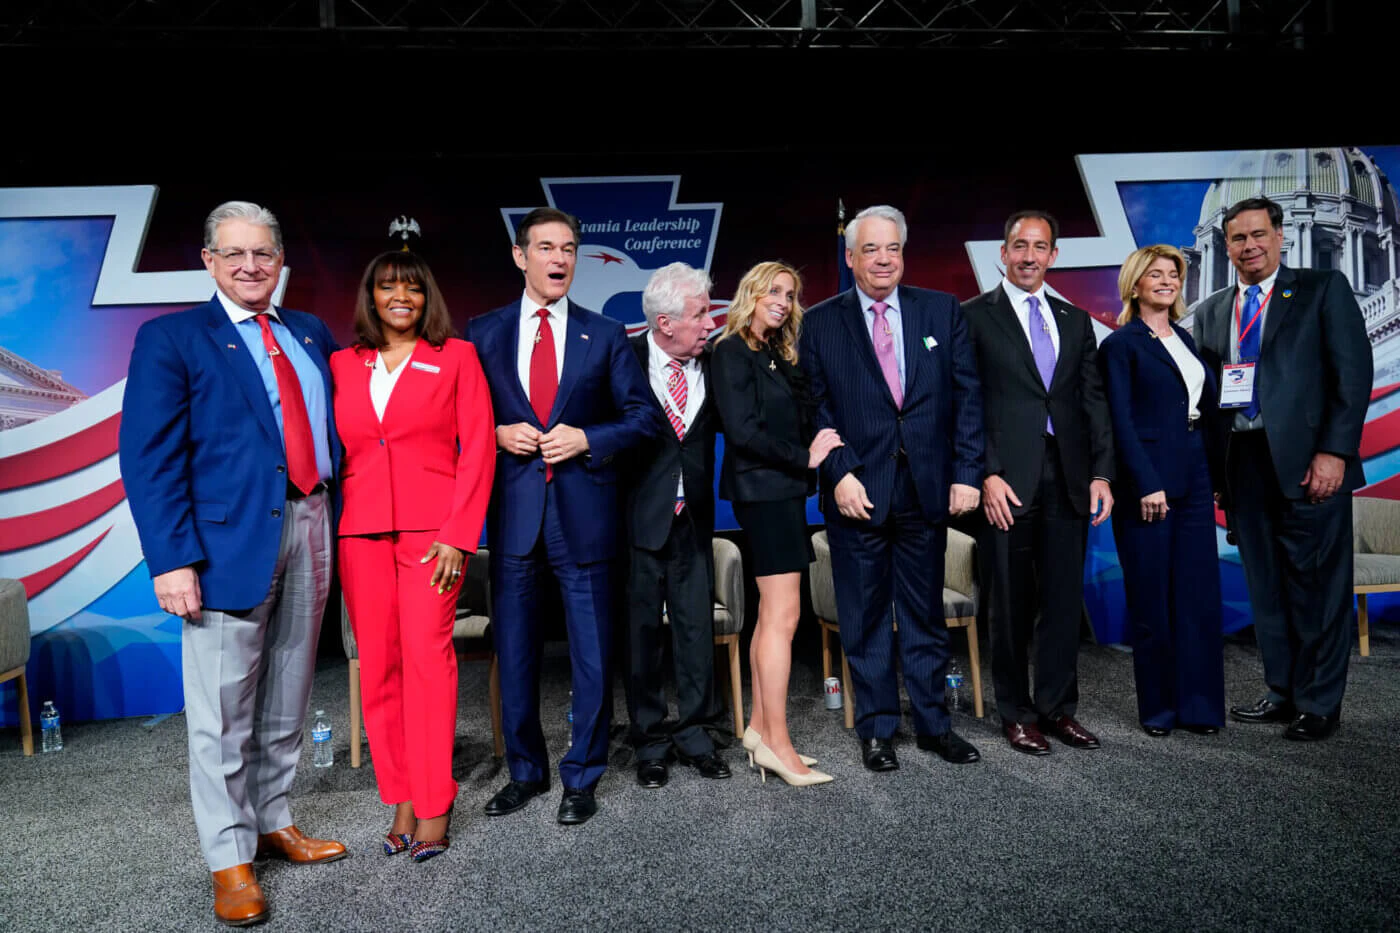 FILE—In this file photo from April 2, 2022, George Bochetto, Kathy Barnette, Mehmet Oz, Jeffrey Lord, Rose Tennent, John Gizzie, Jeff Bartos, Carla Sands, and Lowman Henry pose for a photograph during a forum for Republican candidates for U.S. Senate in Pennsylvania at the Pennsylvania Leadership Conference in Camp Hill, Pa. Republicans have made anger over the 2020 election a staple of this year's mid-term primary campaigns as Democrats appear prepared to tie them to the Jan. 6 insurrection at the U.S. Capitol, contending that Republican-sponsored election legislation is an attack on voting rights. Pennsylvania's primary election is May 17. (AP Photo/Matt Rourke, File)